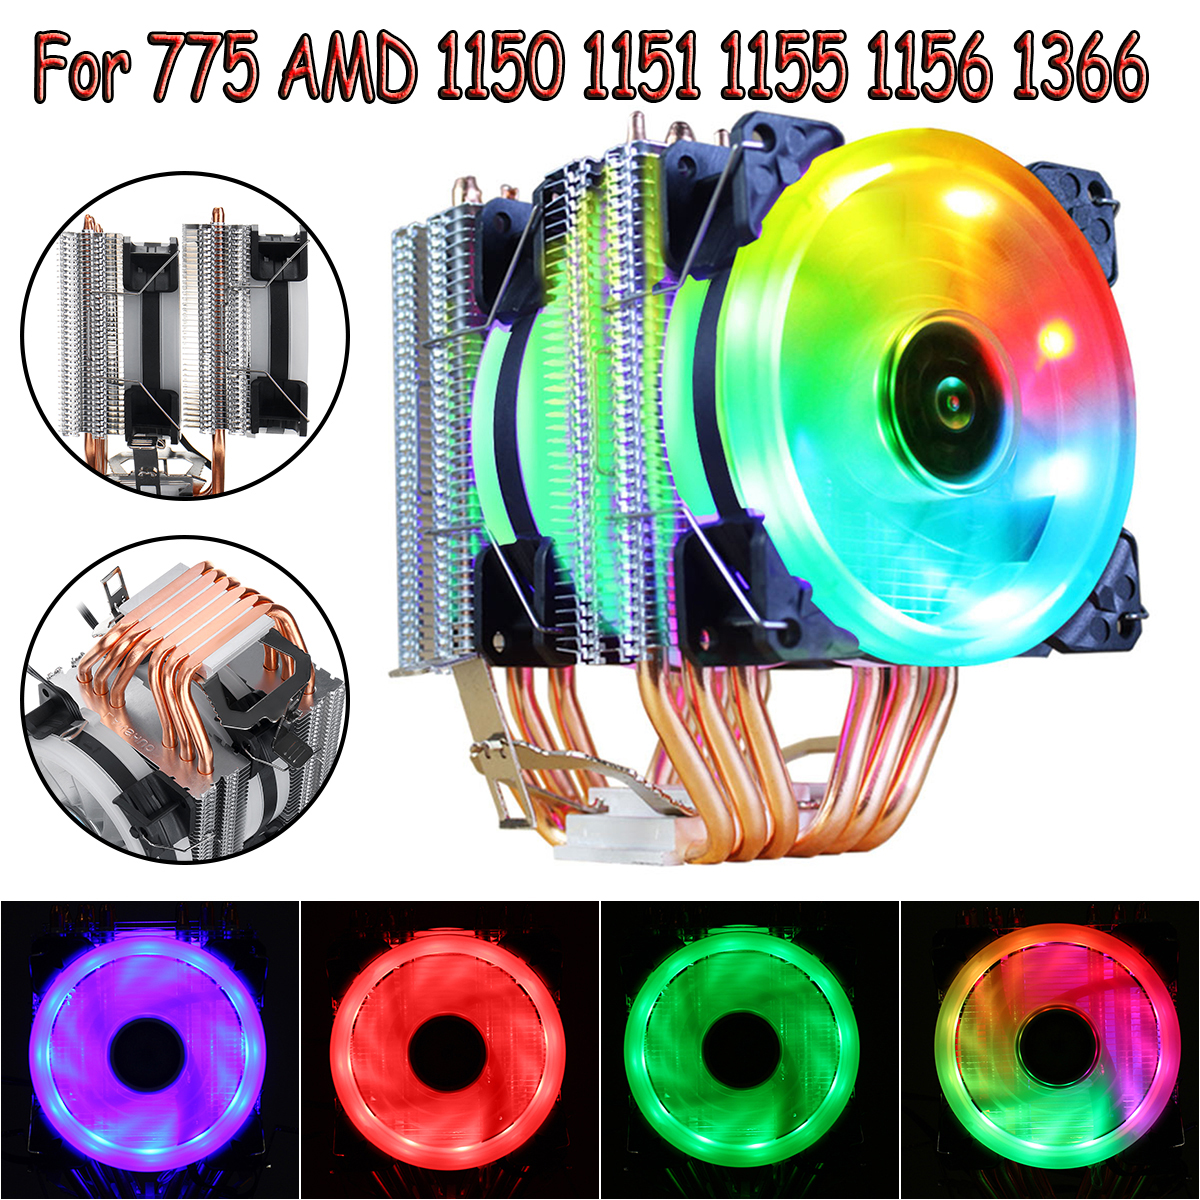 CPU-Cooler-LED-RGB-6-Heatpipes-4-Pin-Dual-Fan-For-Intel-115611551151775-AMD-1761052-1